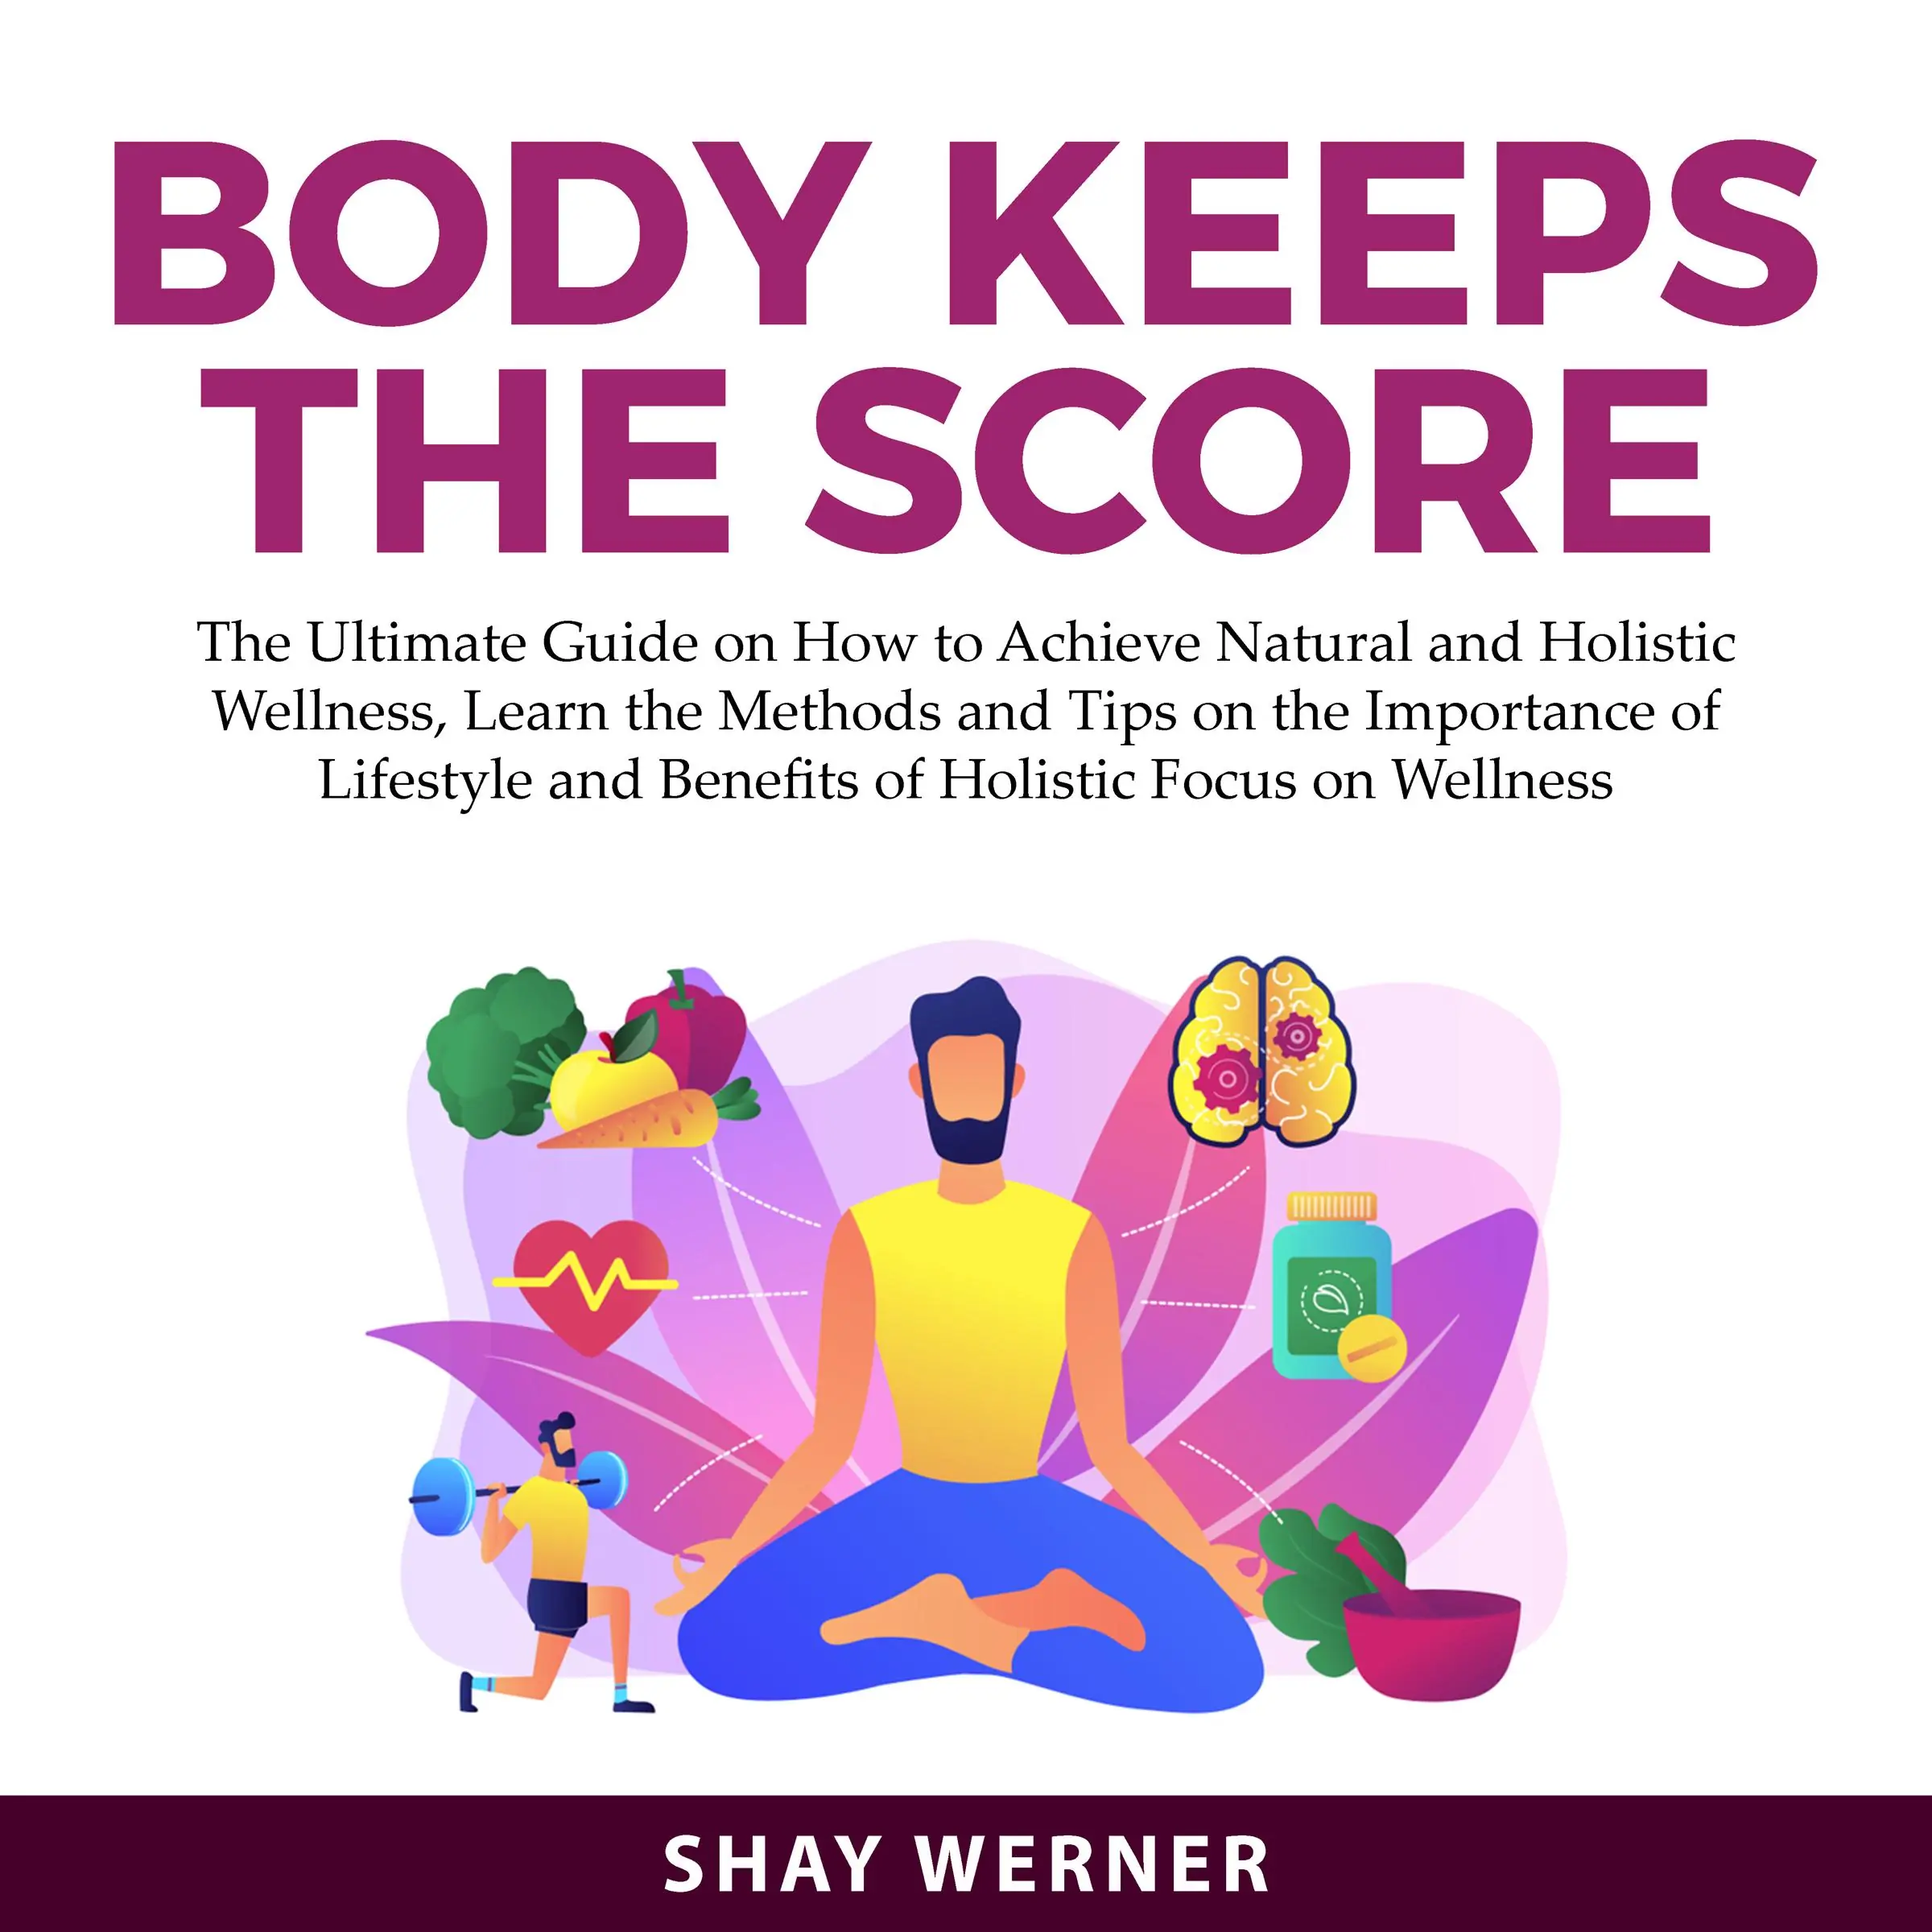 Body Keeps the Score: The Ultimate Guide on How to Achieve Natural and Holistic Wellness, Learn the Methods and Tips on the Importance of Lifestyle and Benefits of Holistic Focus on Wellness by Shay Werner Audiobook